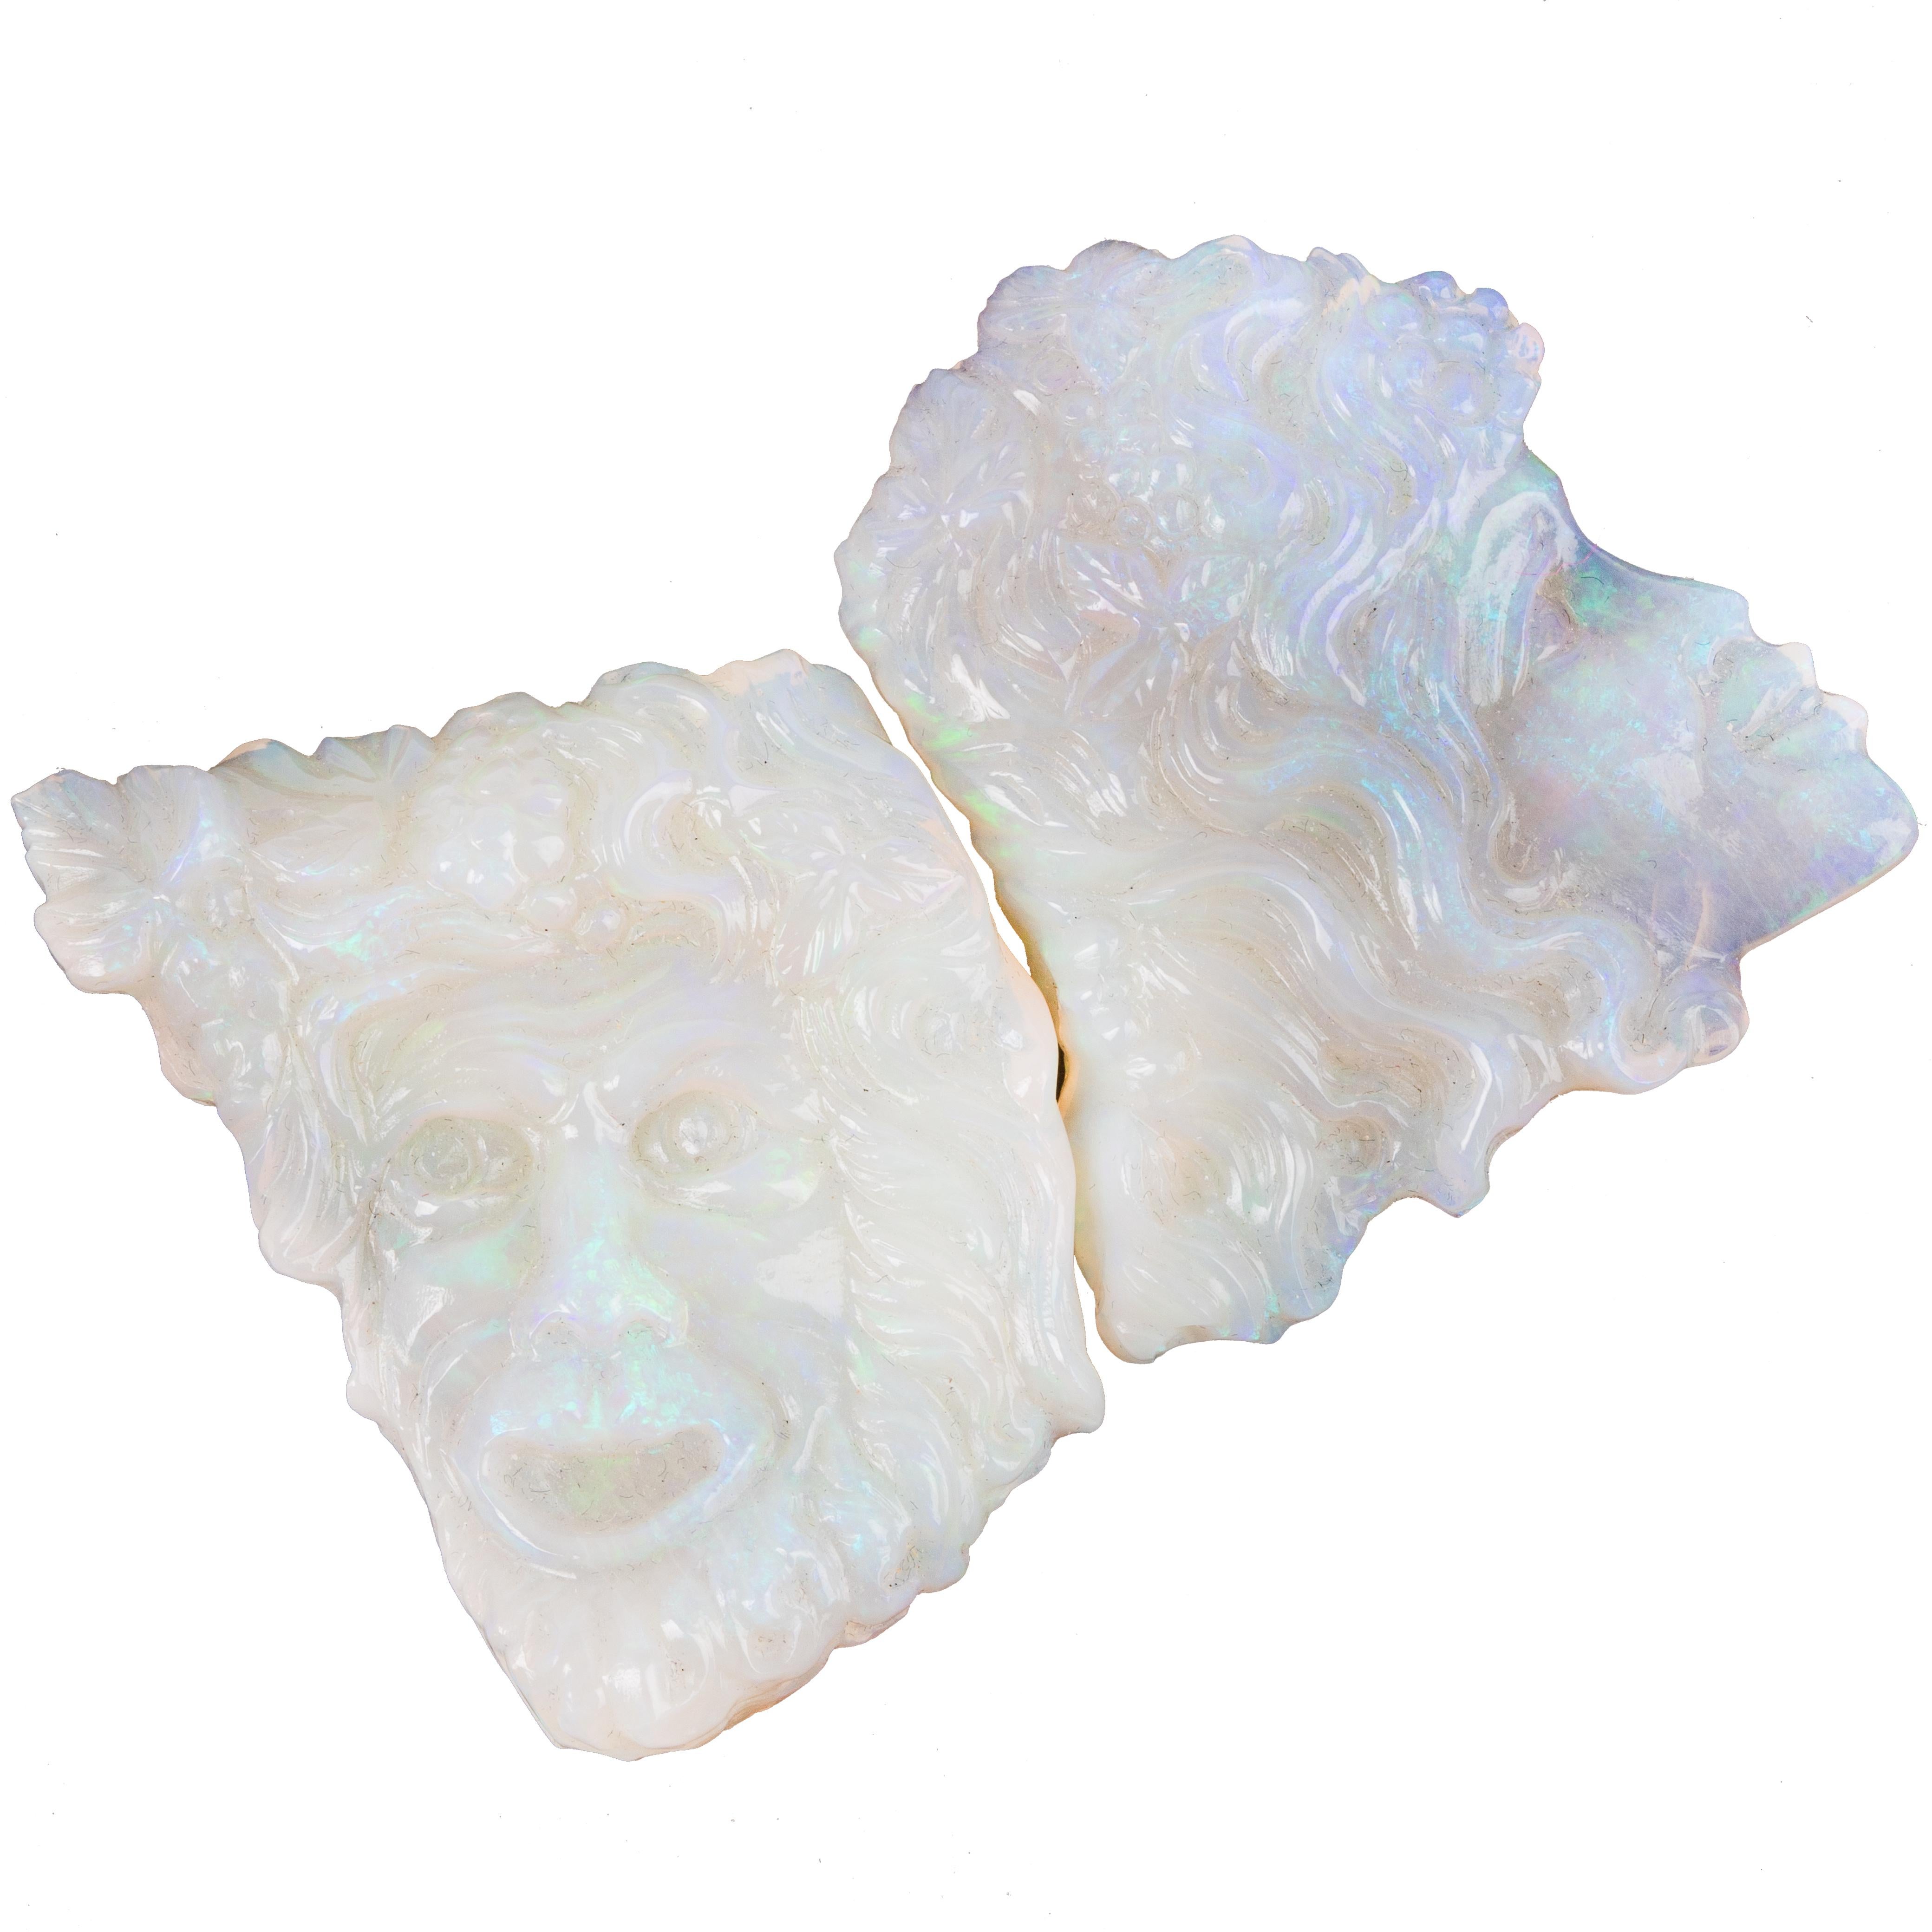 This pair of opal faces feature and man's face and a woman's face. This pair is very unique and is 94 carat tw. This pair comes in a case and is a wonderful collector's item. 
The opal stones are originally from Australia and carved in Europe.